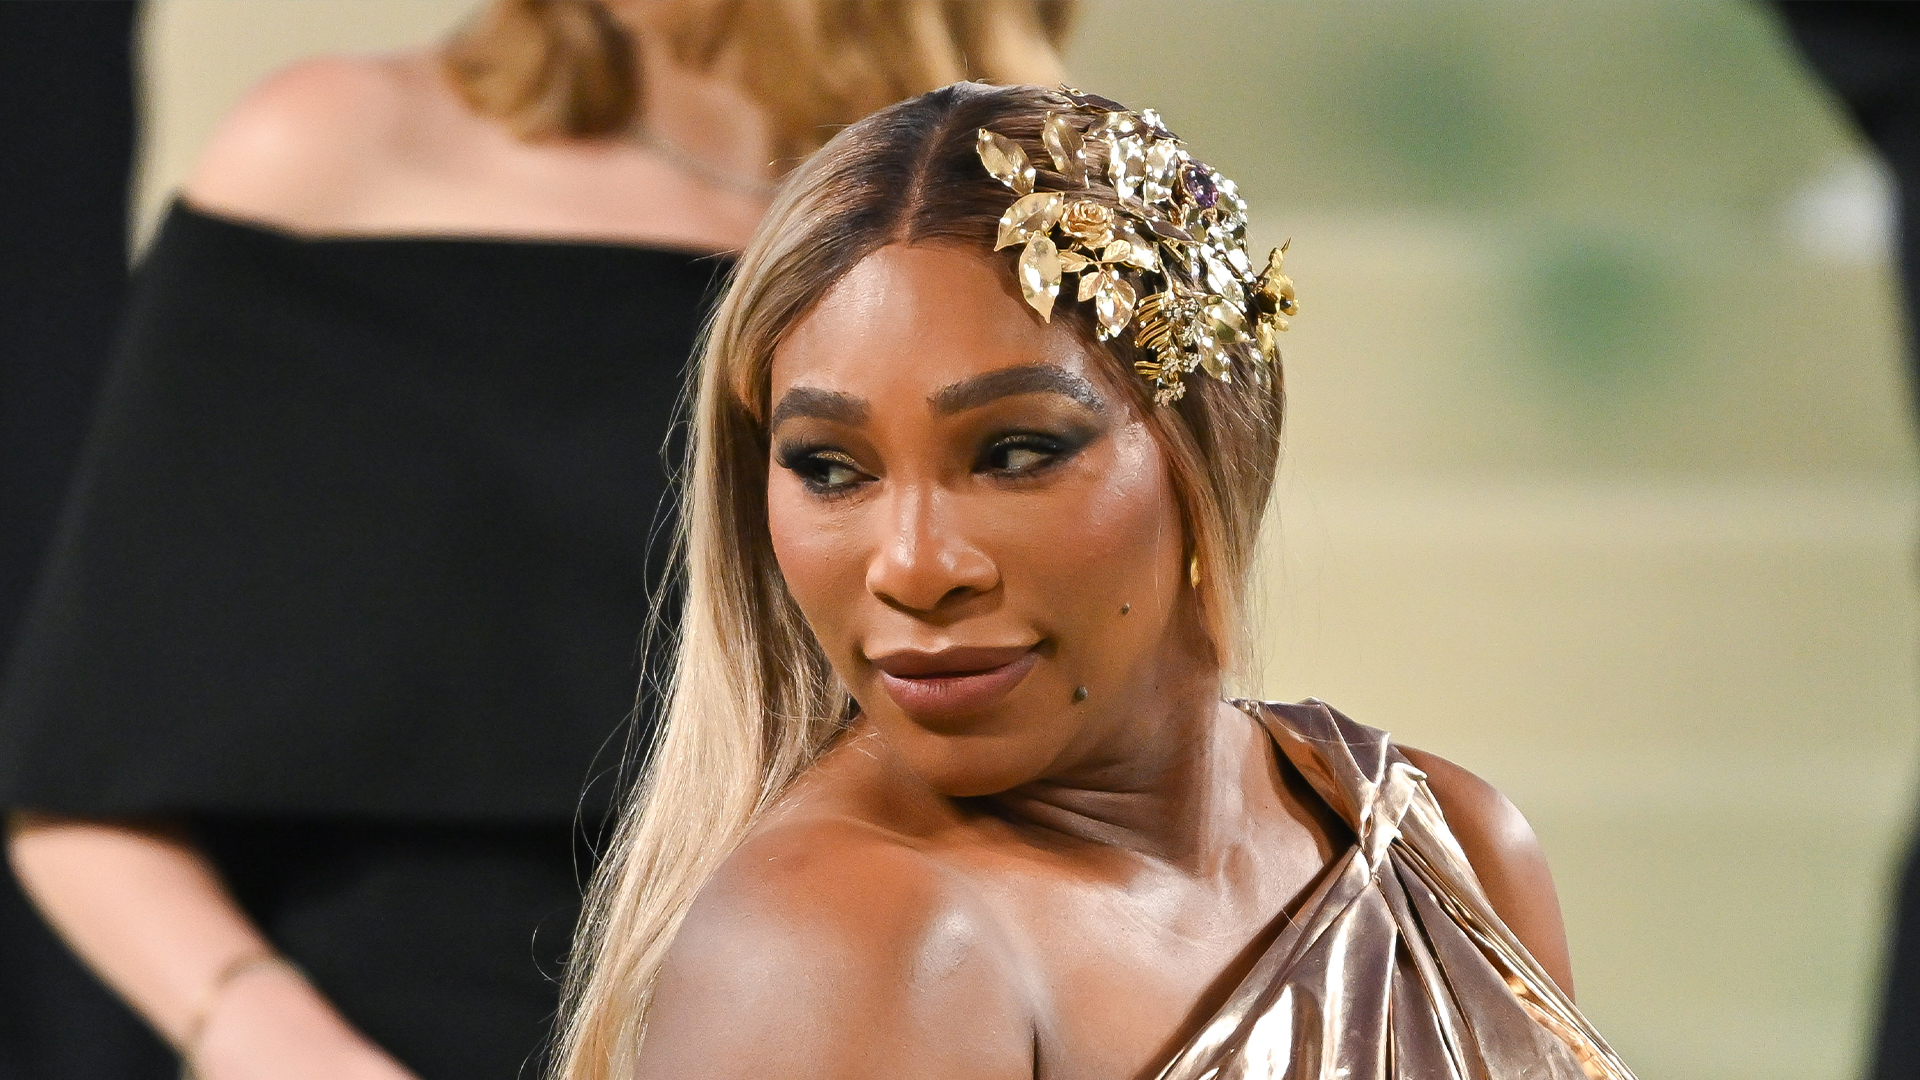 Serena Williams in major career change as tennis icon ‘excited’ for new role which requires ‘unparalleled charisma’ [Video]